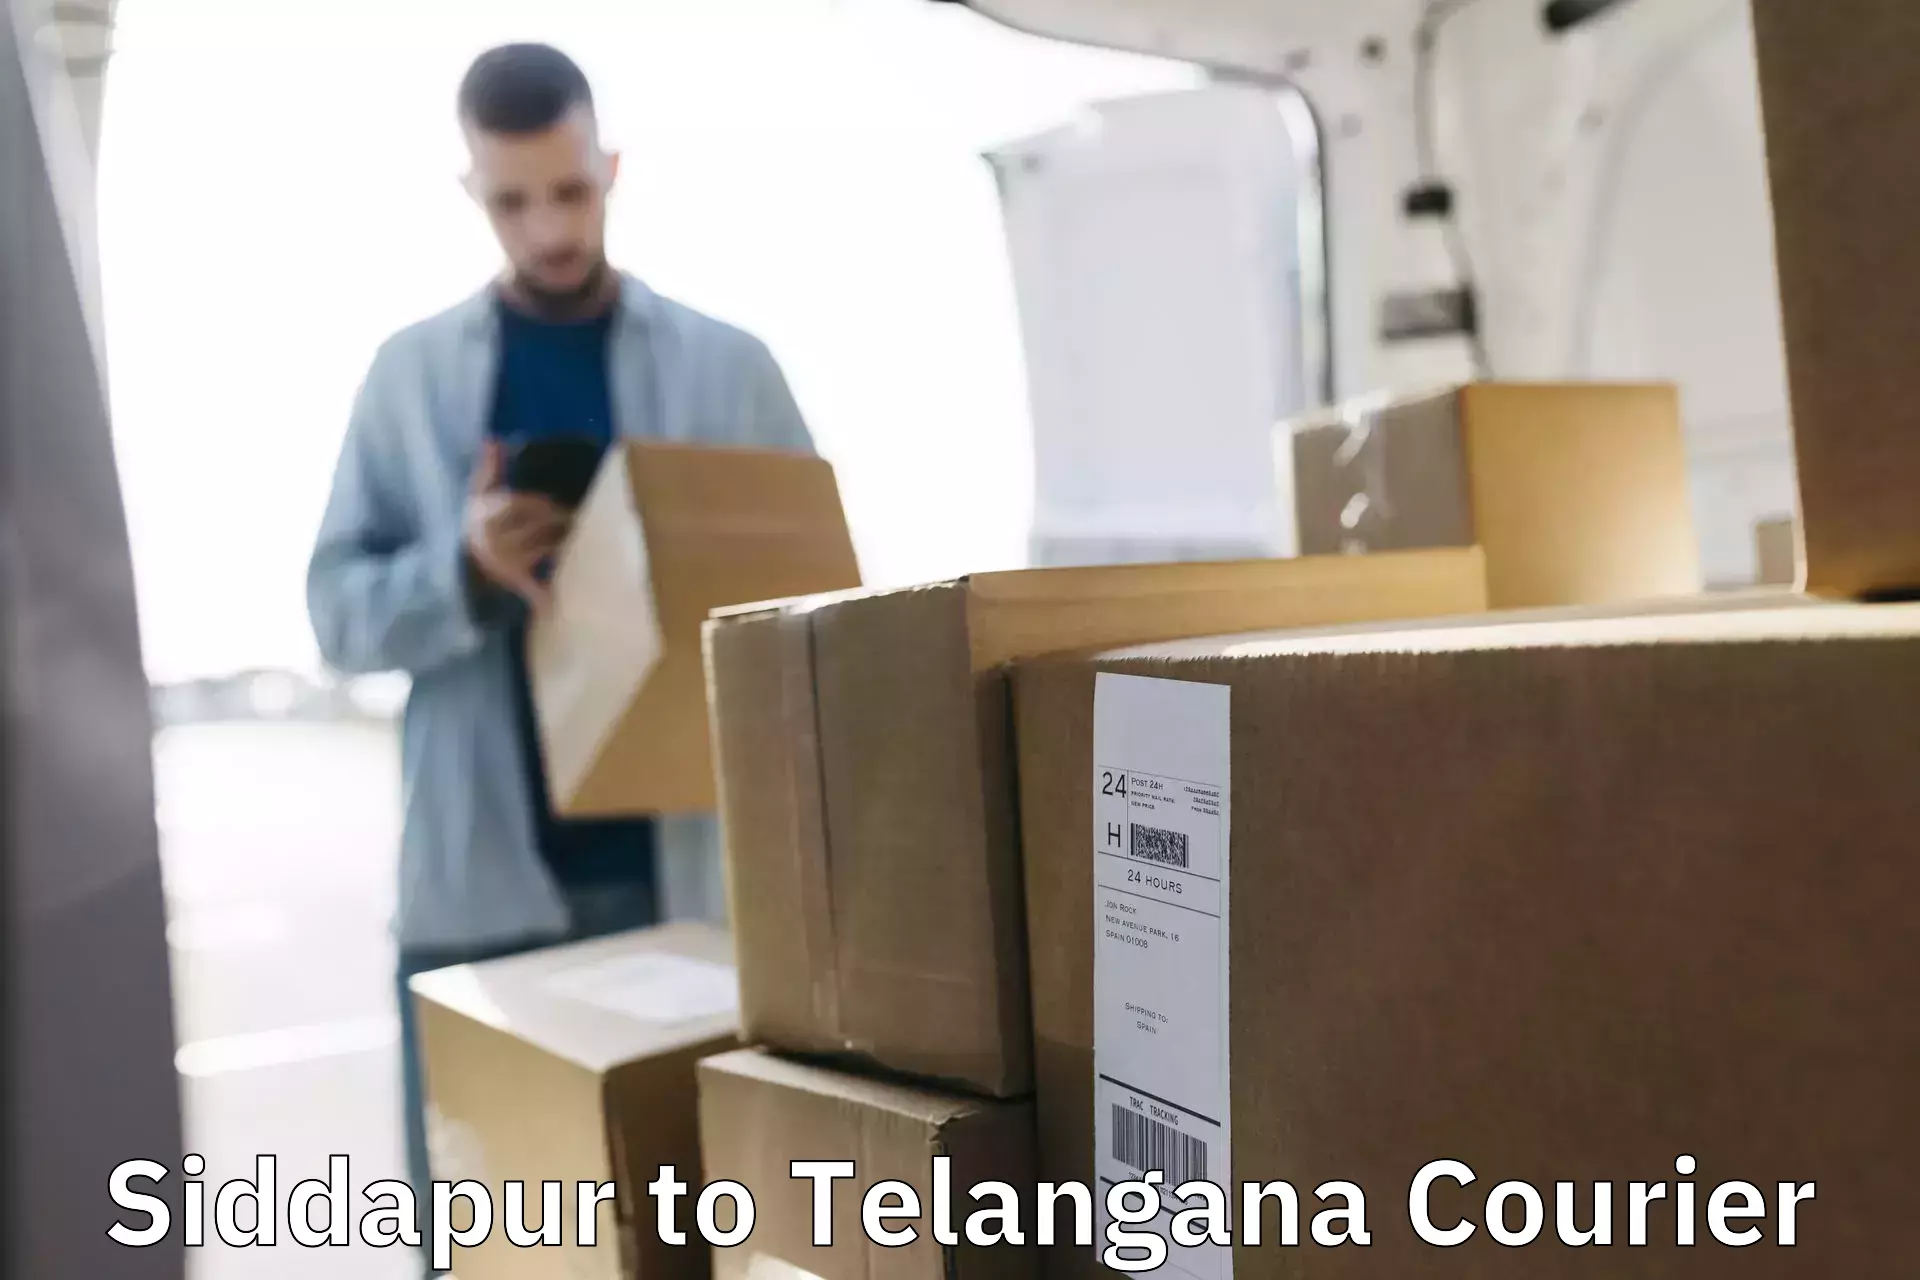 Modern delivery technologies Siddapur to Telangana